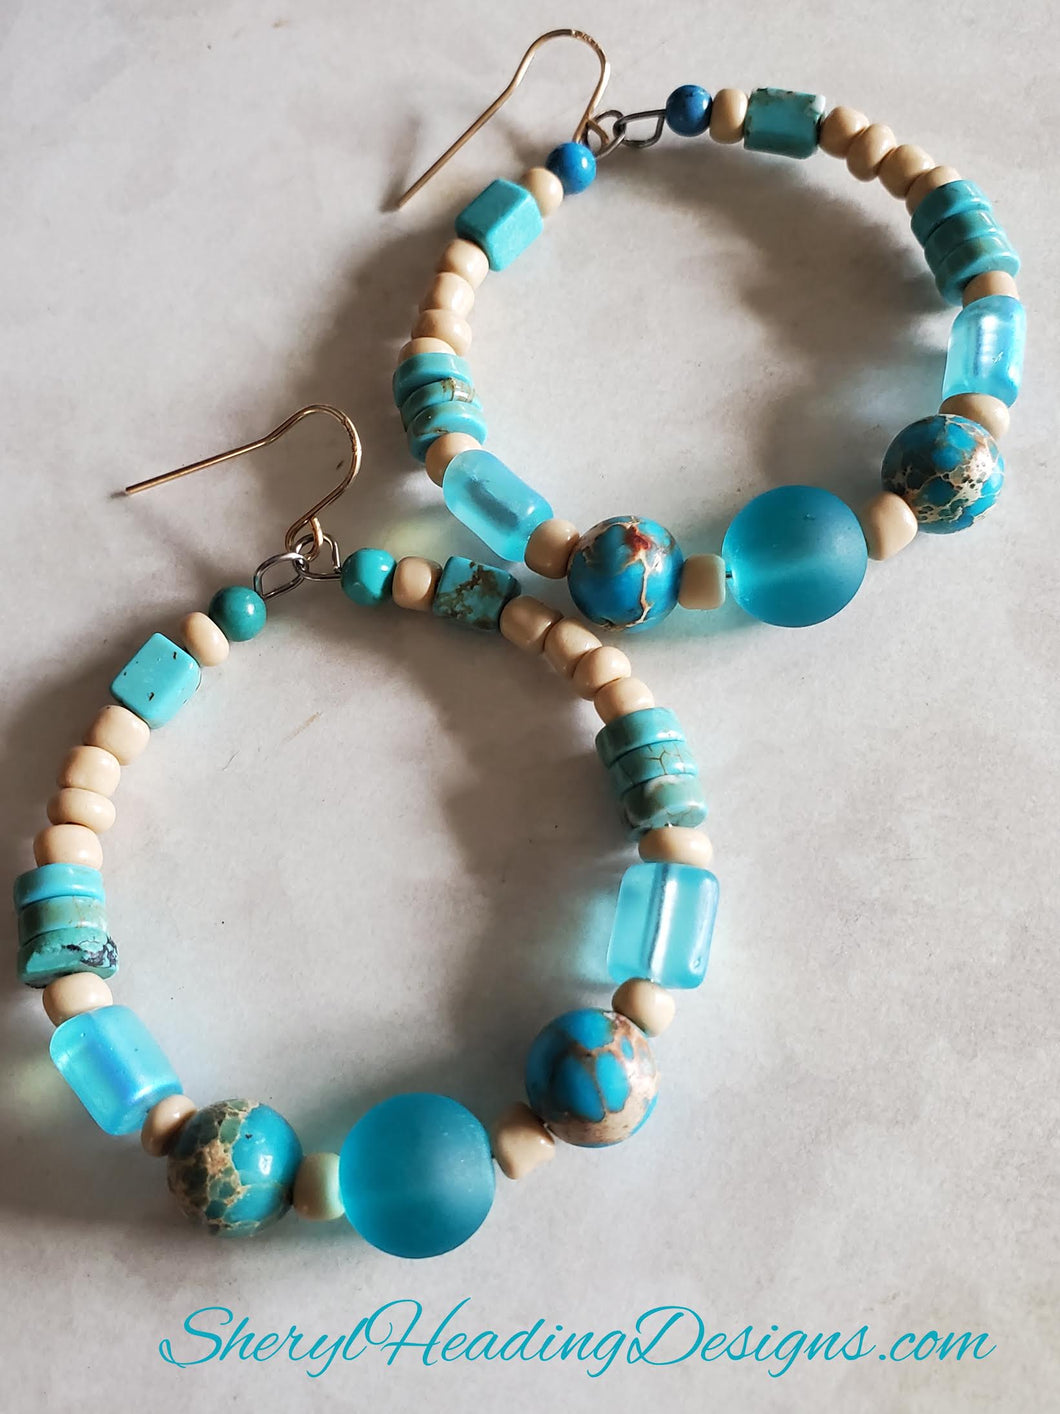 Turquoise Hoop Earrings are Calling Your Name